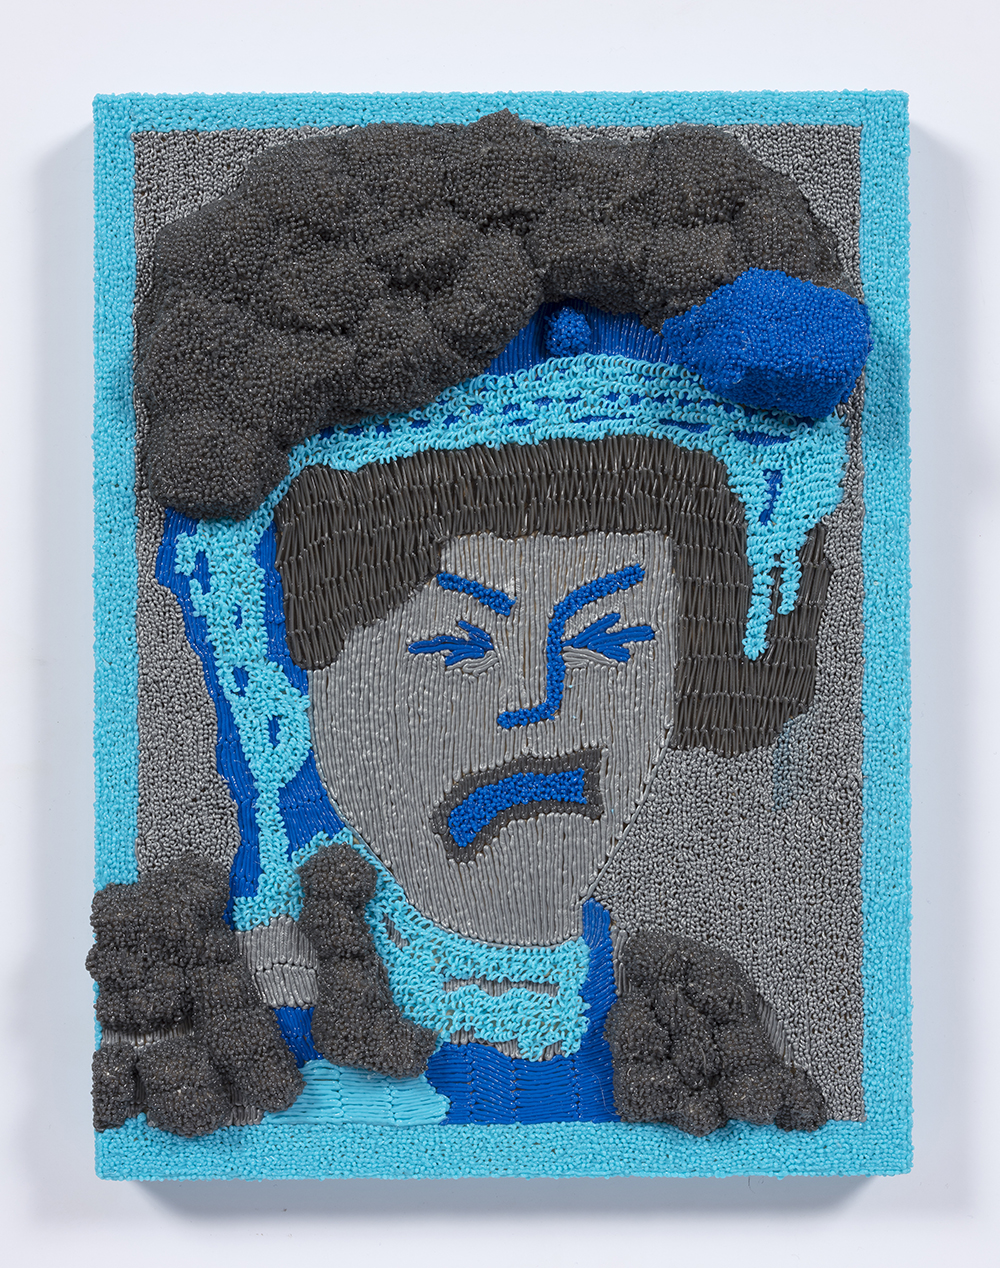 Dominic Dispirito. <em>I can’t open my minces</em>, 2018. Manually printed PLA plastic on board, 11 3/4 x 8 1/4 inches  (30 x 21 cm)